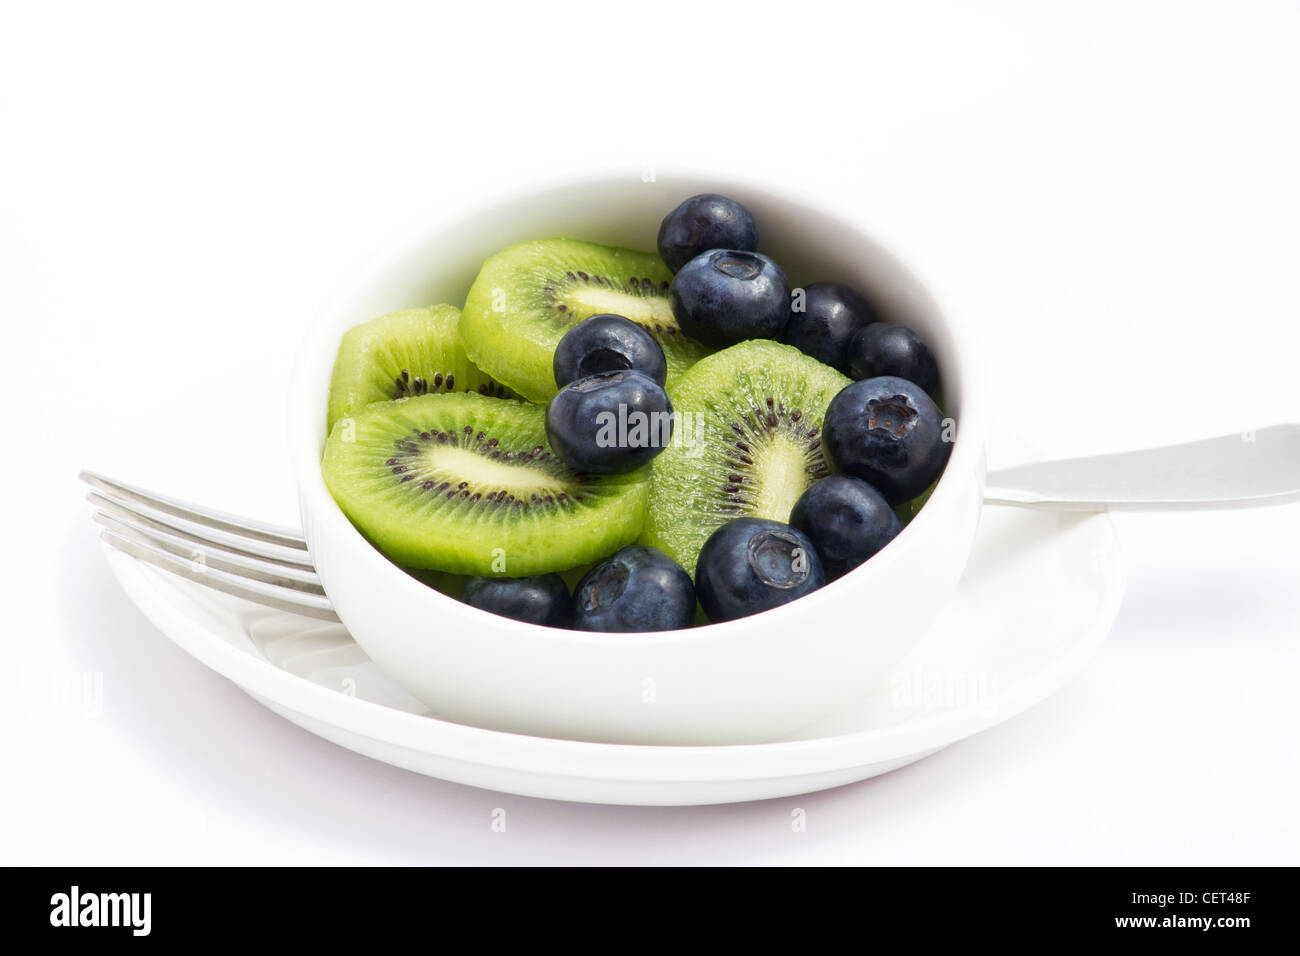 Sliced kiwi and blueberries in a white bowl on white background Stock Photo